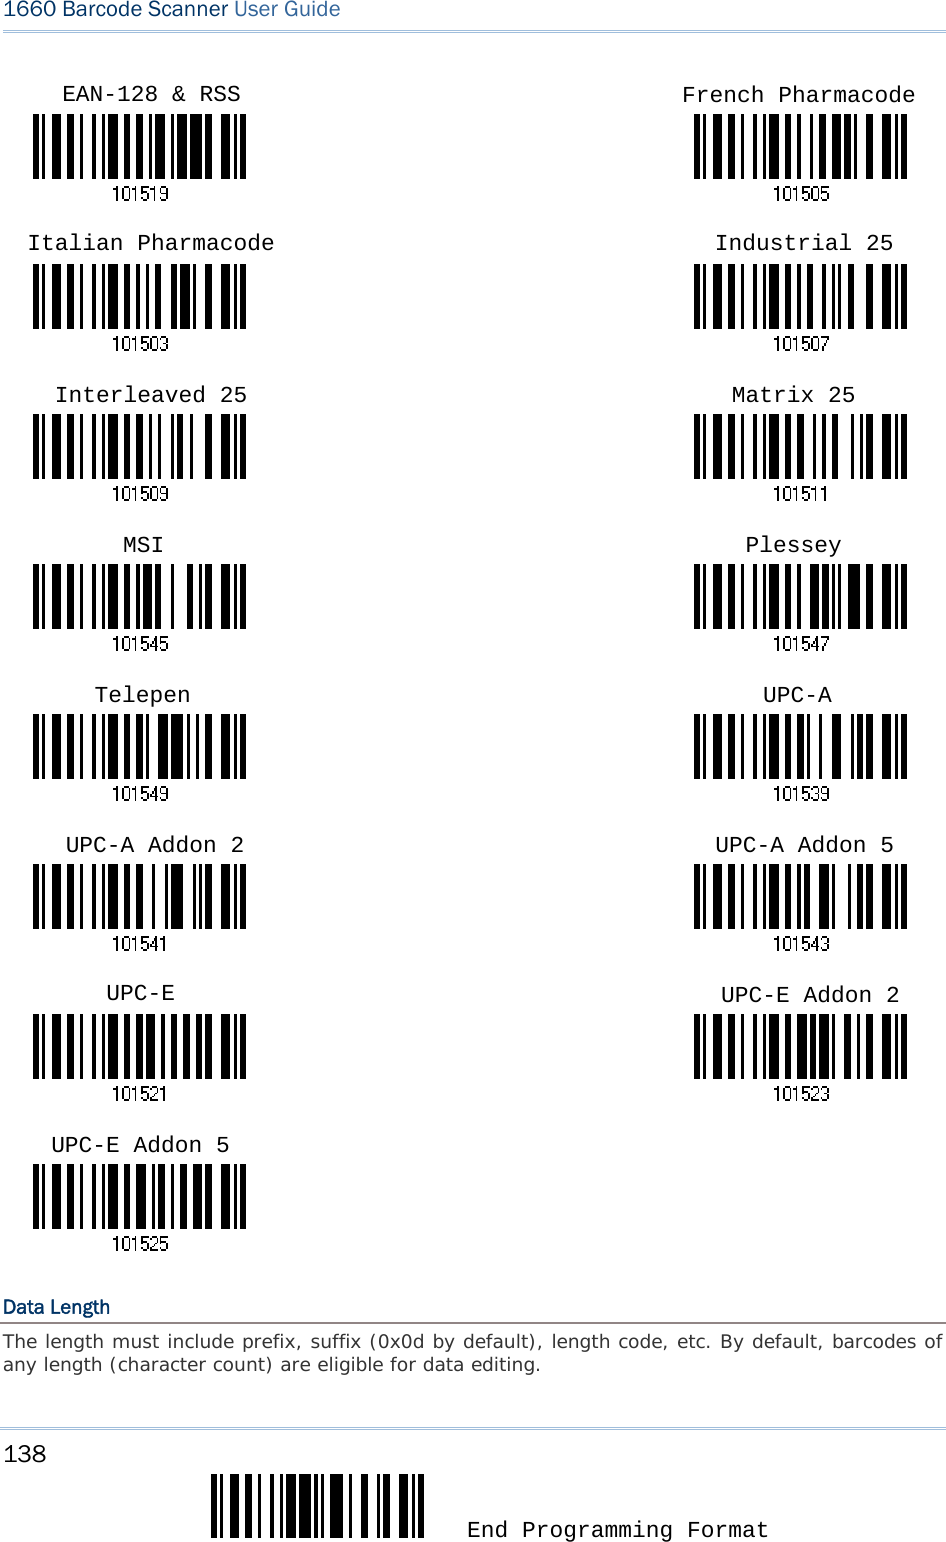 138  End Programming Format 1660 Barcode Scanner User Guide                                                                                                                                                                                                                                                                             Data Length The length must include prefix, suffix (0x0d by default), length code, etc. By default, barcodes of any length (character count) are eligible for data editing.  Italian Pharmacode  Industrial 25 Interleaved 25  Matrix 25 MSI Plessey UPC-A Addon 2 UPC-A Addon 5UPC-E  UPC-E Addon 2 Telepen  UPC-A  EAN-128 &amp; RSS French PharmacodeUPC-E Addon 5